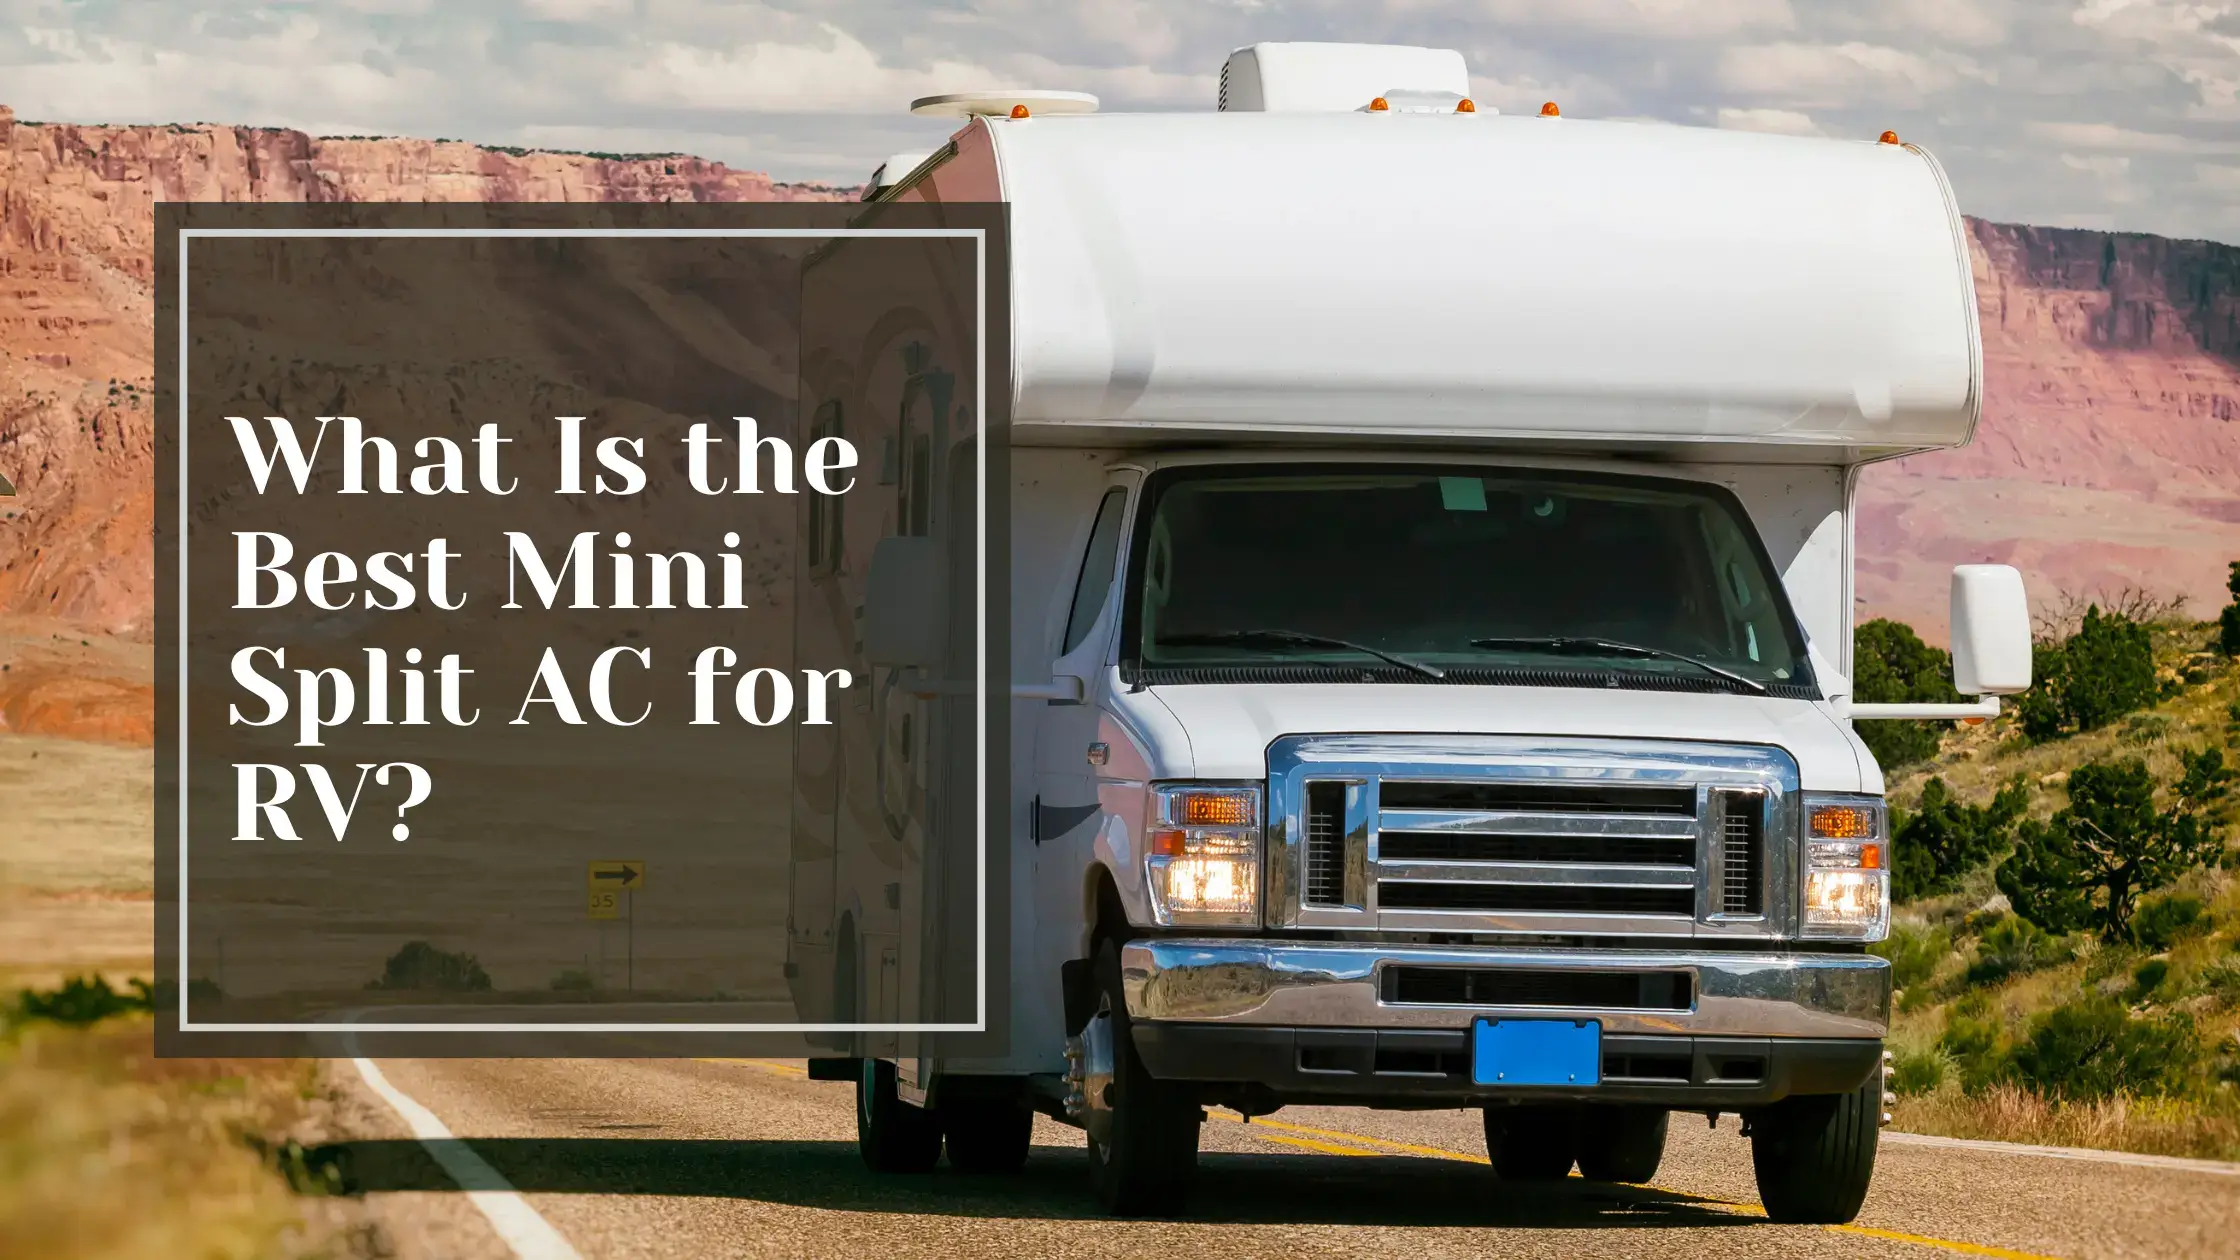 What Is the Best Mini Split AC for RV?